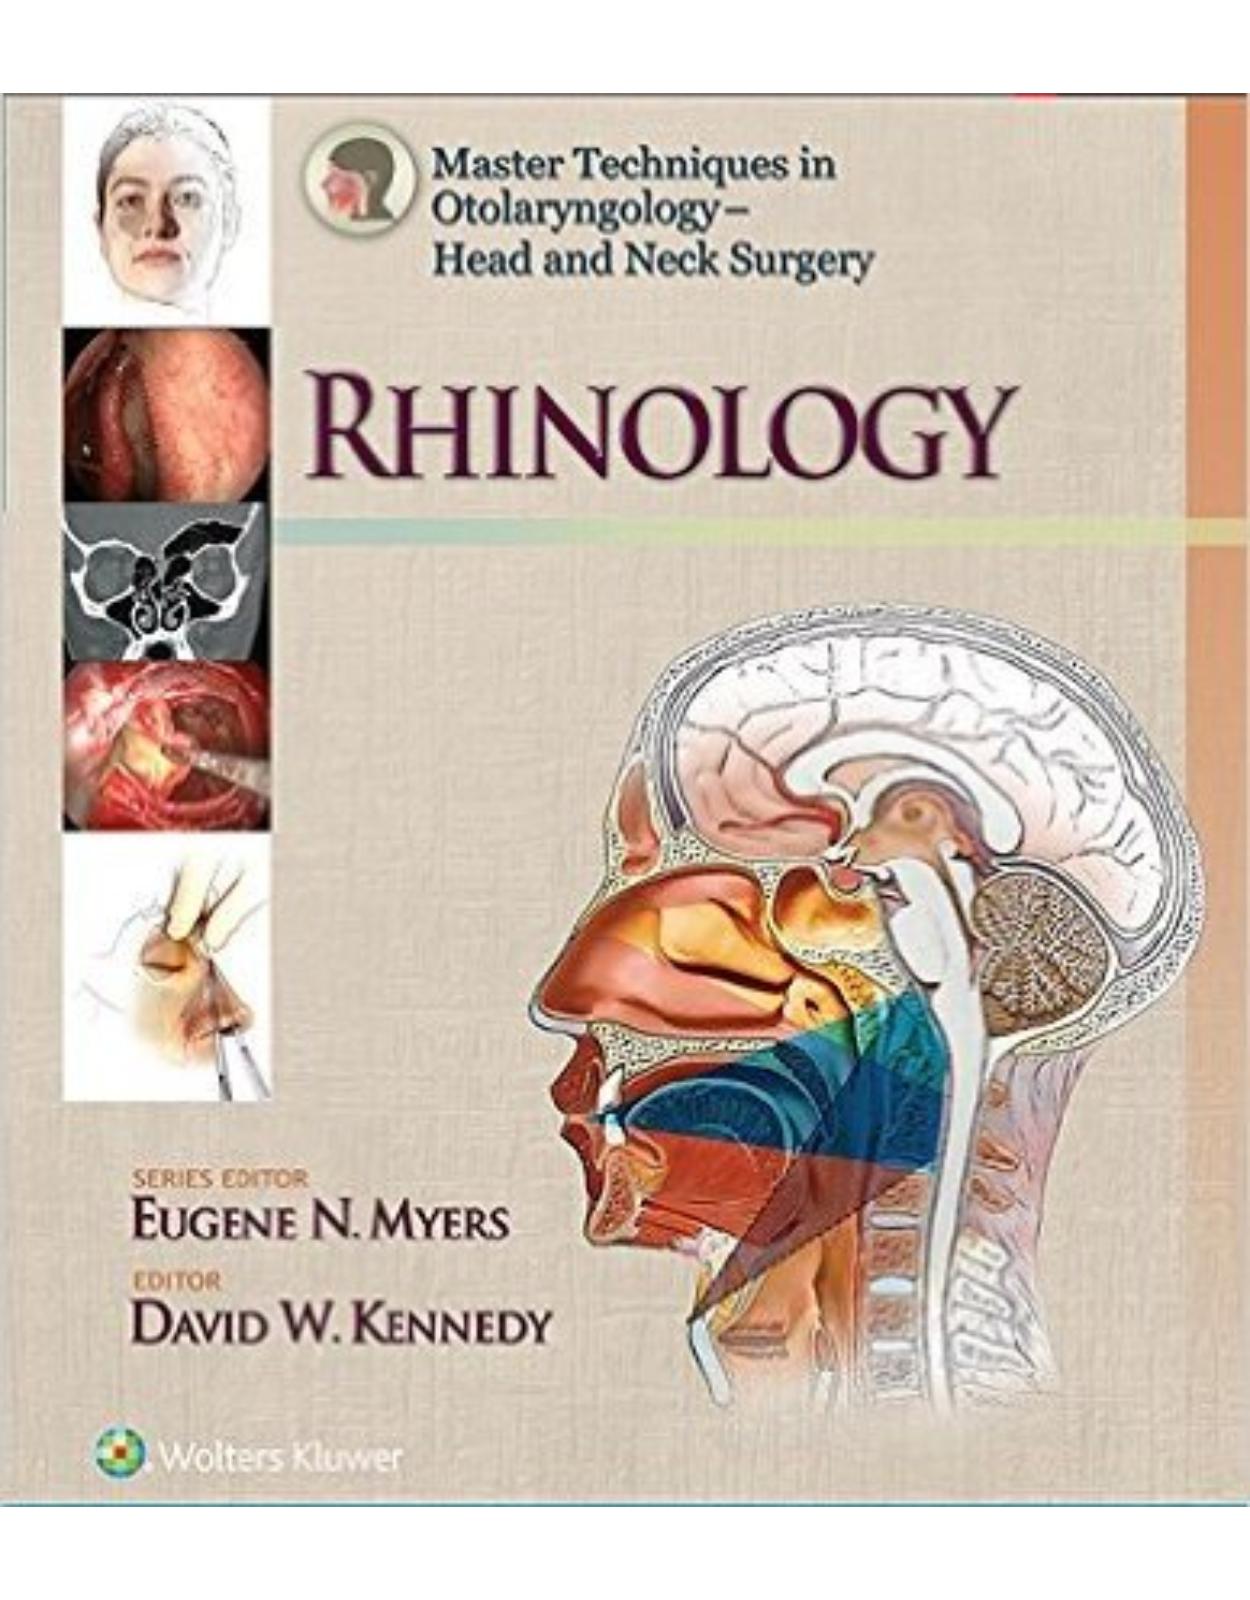 Master Techniques in Otolaryngology - Head and Neck Surgery: Rhinology (Master Techniques in Otolaryngology Surgery) First Edition